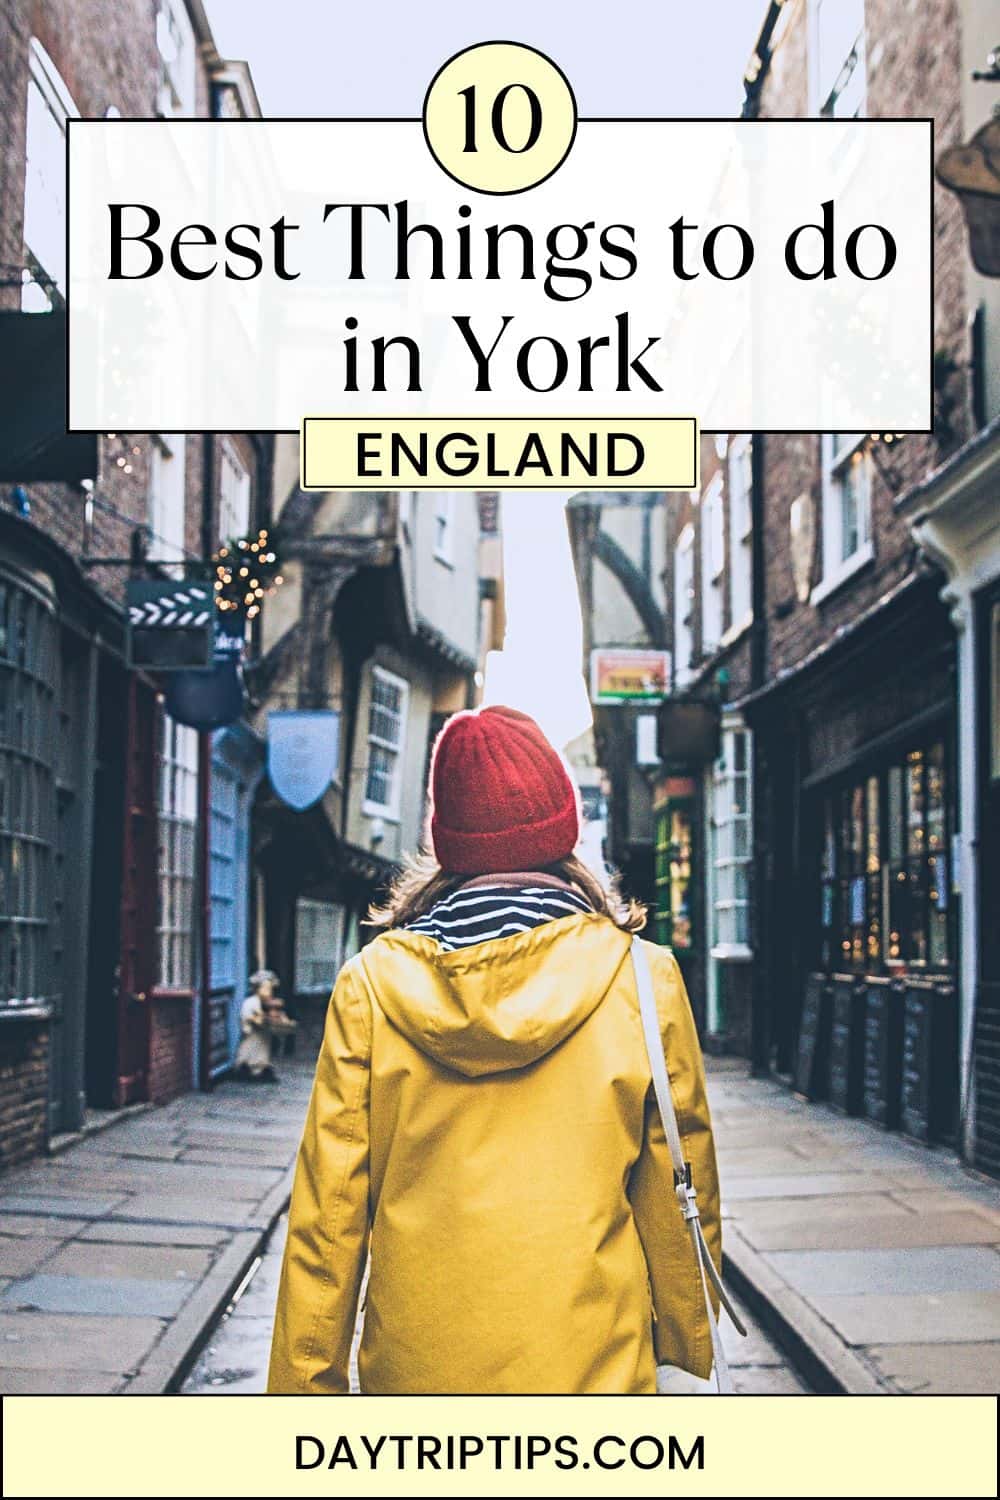 Best Things to do in York England